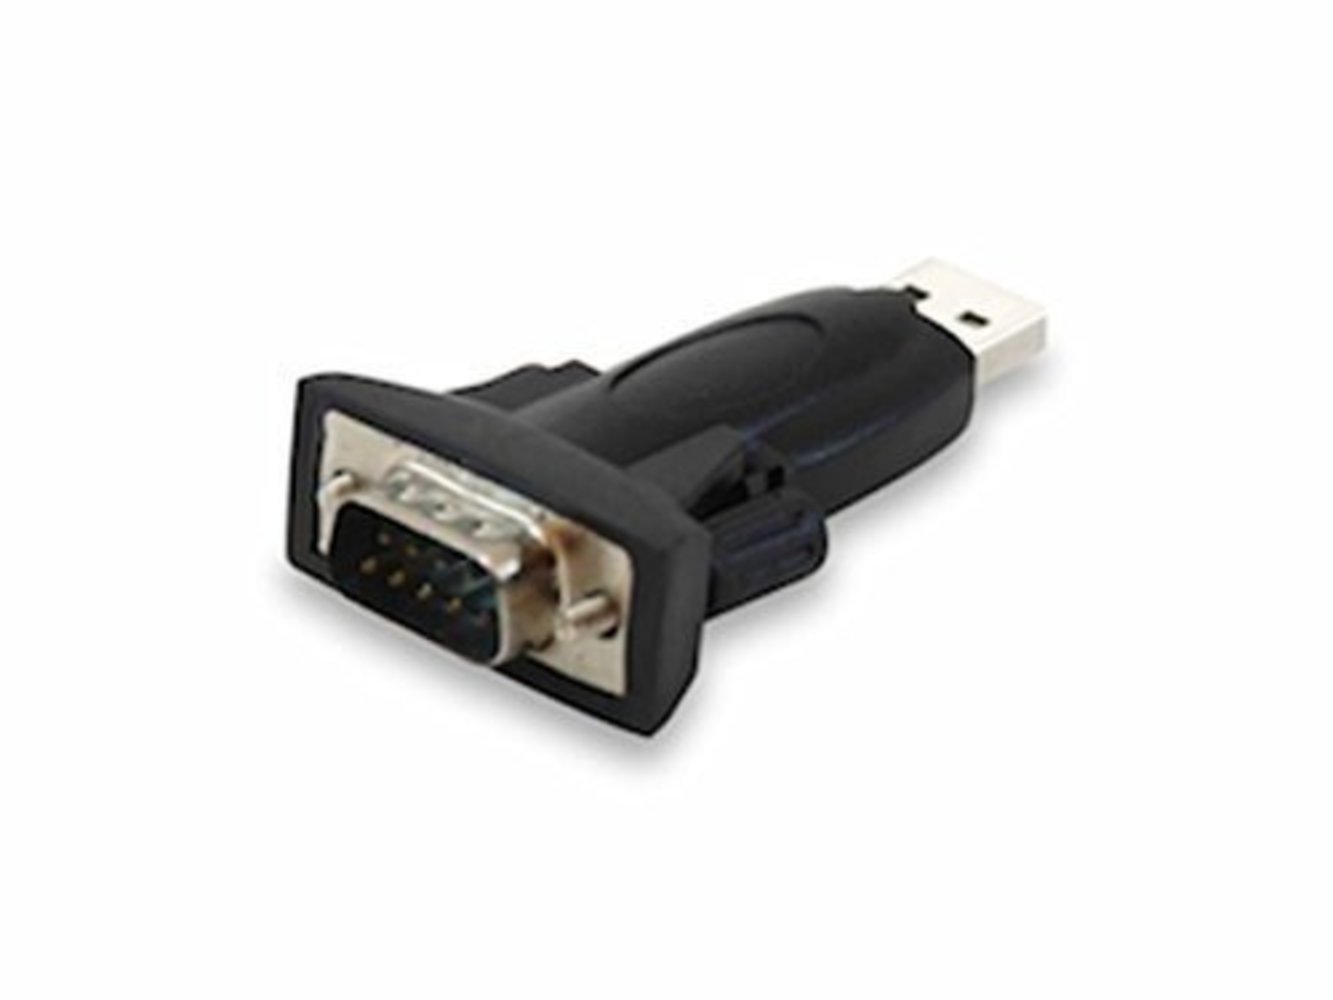 Equip USB to Serial Converter - High-Speed Data Transfer & Seamless Connectivity